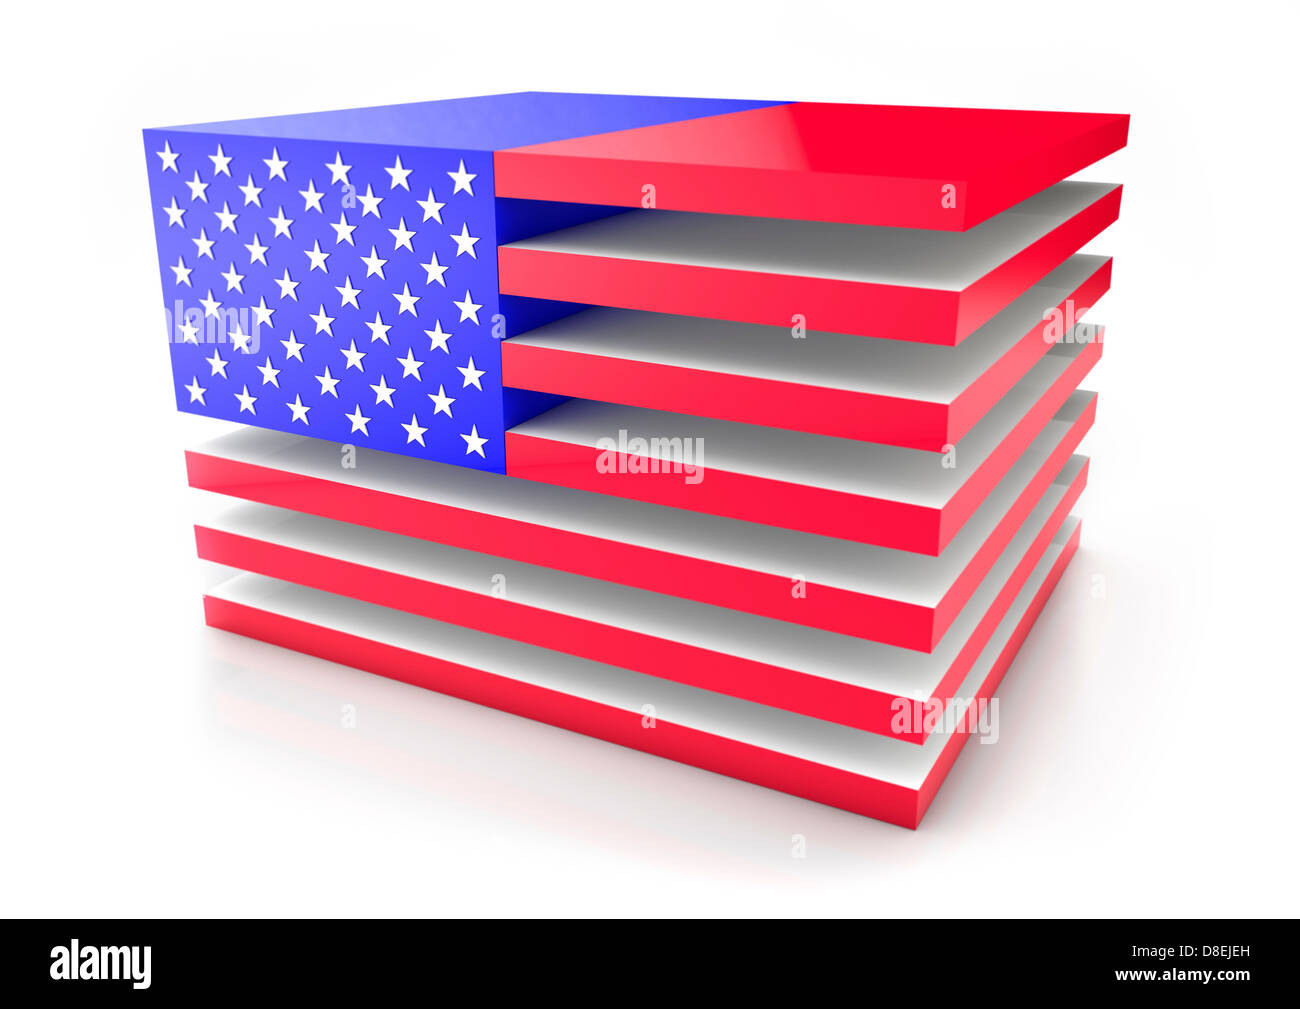 US - American - Stars and Stripes Flag - 3D Concept Stock Photo